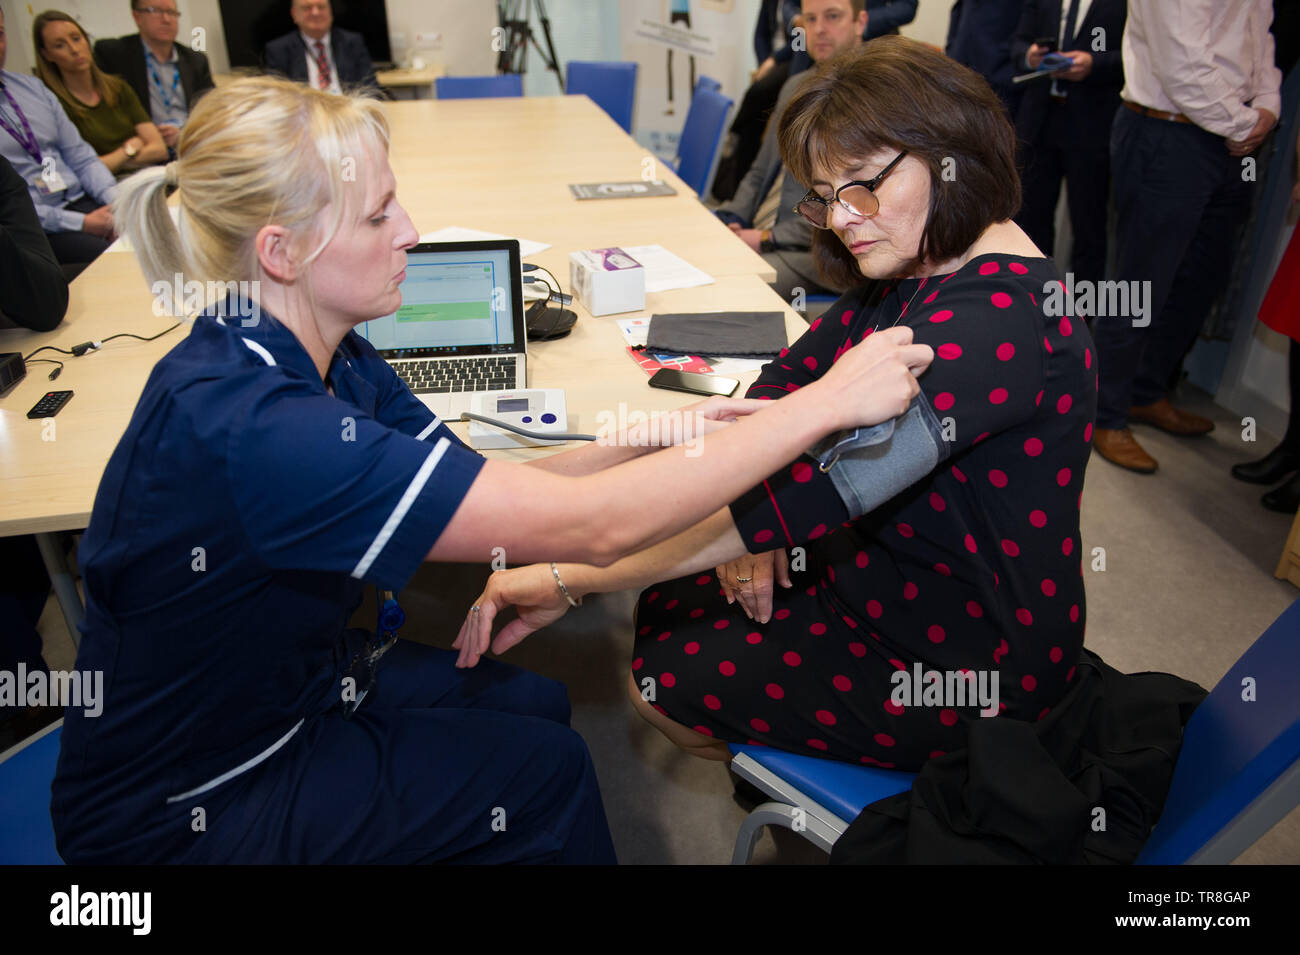 East Kilbride, UK. 30 May 2019.EMBARGO UNTIL 31 MAY AT 00:01 Pictured: (left-right) Laura MacKinnon; Jeane Freeman. New technology that allows patients to monitor their blood pressure at home will be rolled out across Scotland.  The Scale-Up BP initiative reduces the need for GP consultations, and can help to deliver more accurate readings.  Patients are shown how to measure their own blood pressure and text the results to an app called Florence, or Flo. Colin Fisher/Alamy Live News Stock Photo